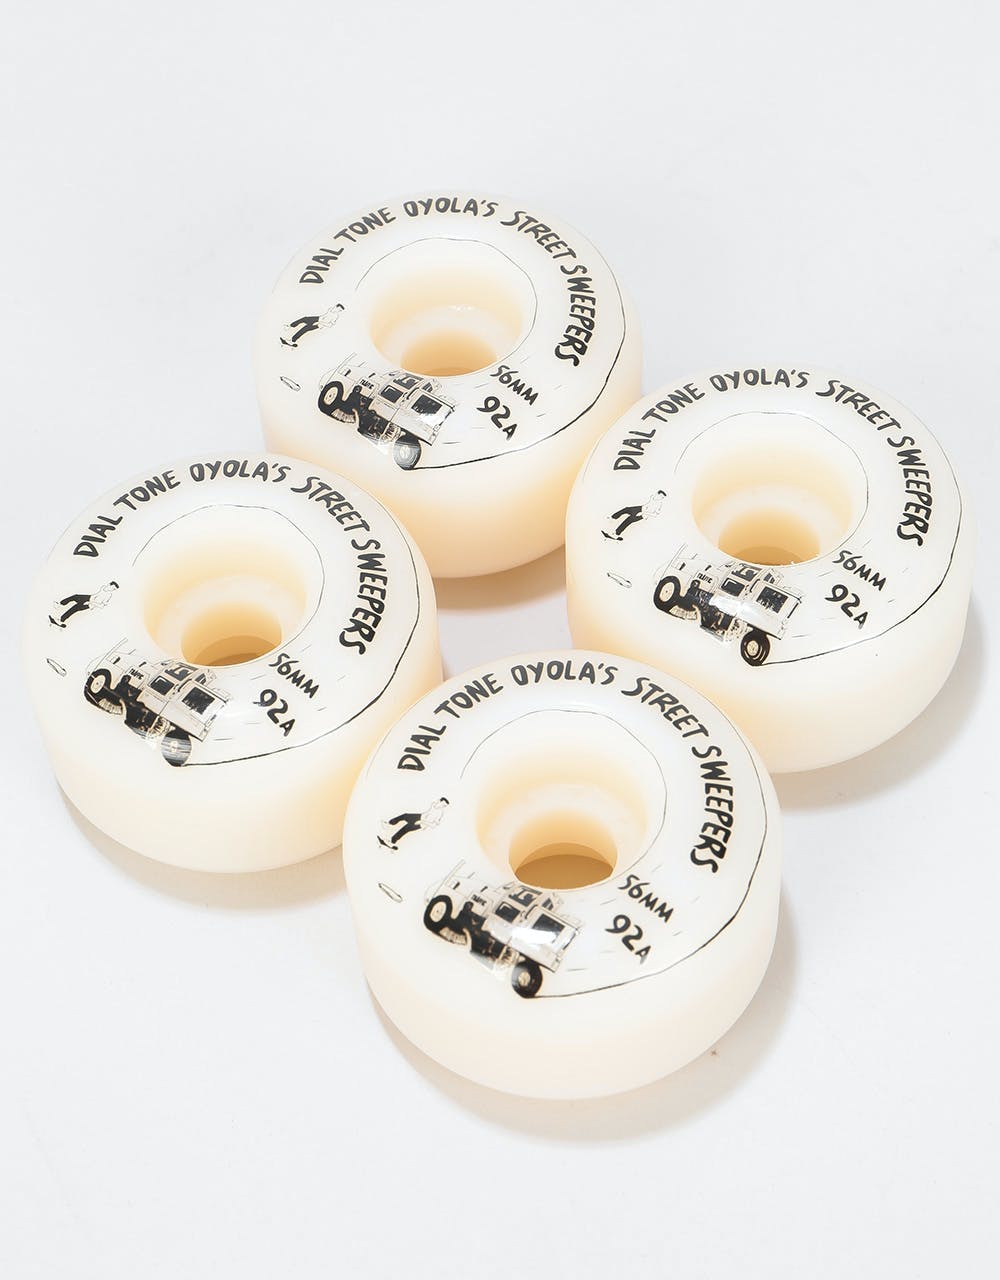 Dial Tone Oyola's Street Sweepers Round Cut 92a Skateboard Wheel - 56m